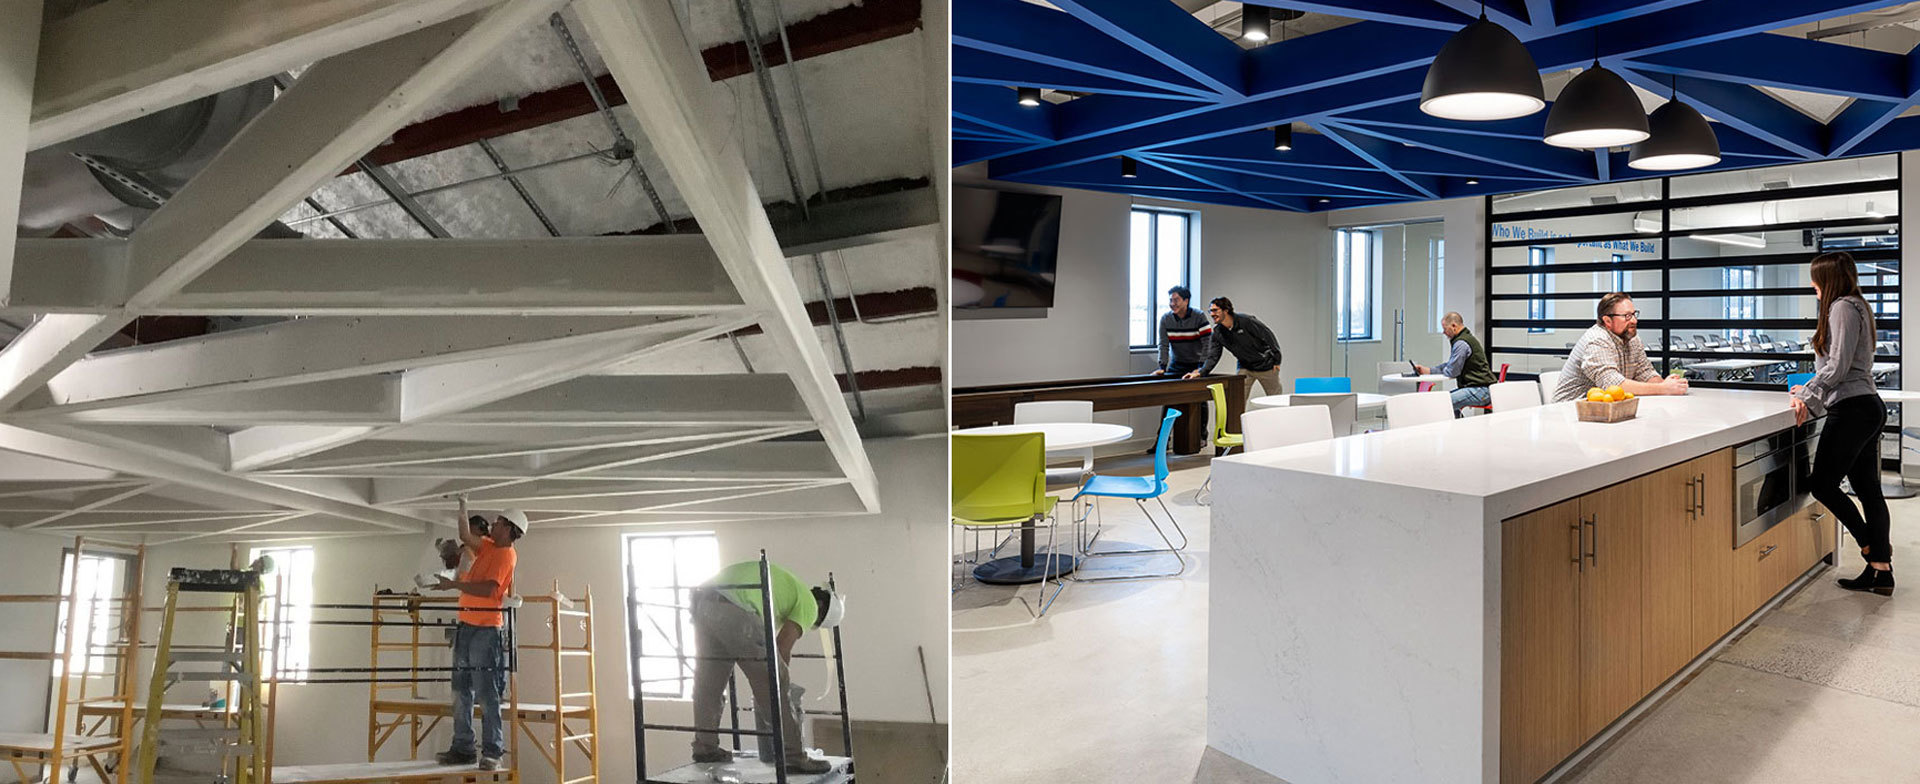 Before and After shot of ceiling structure during construction and once complete.